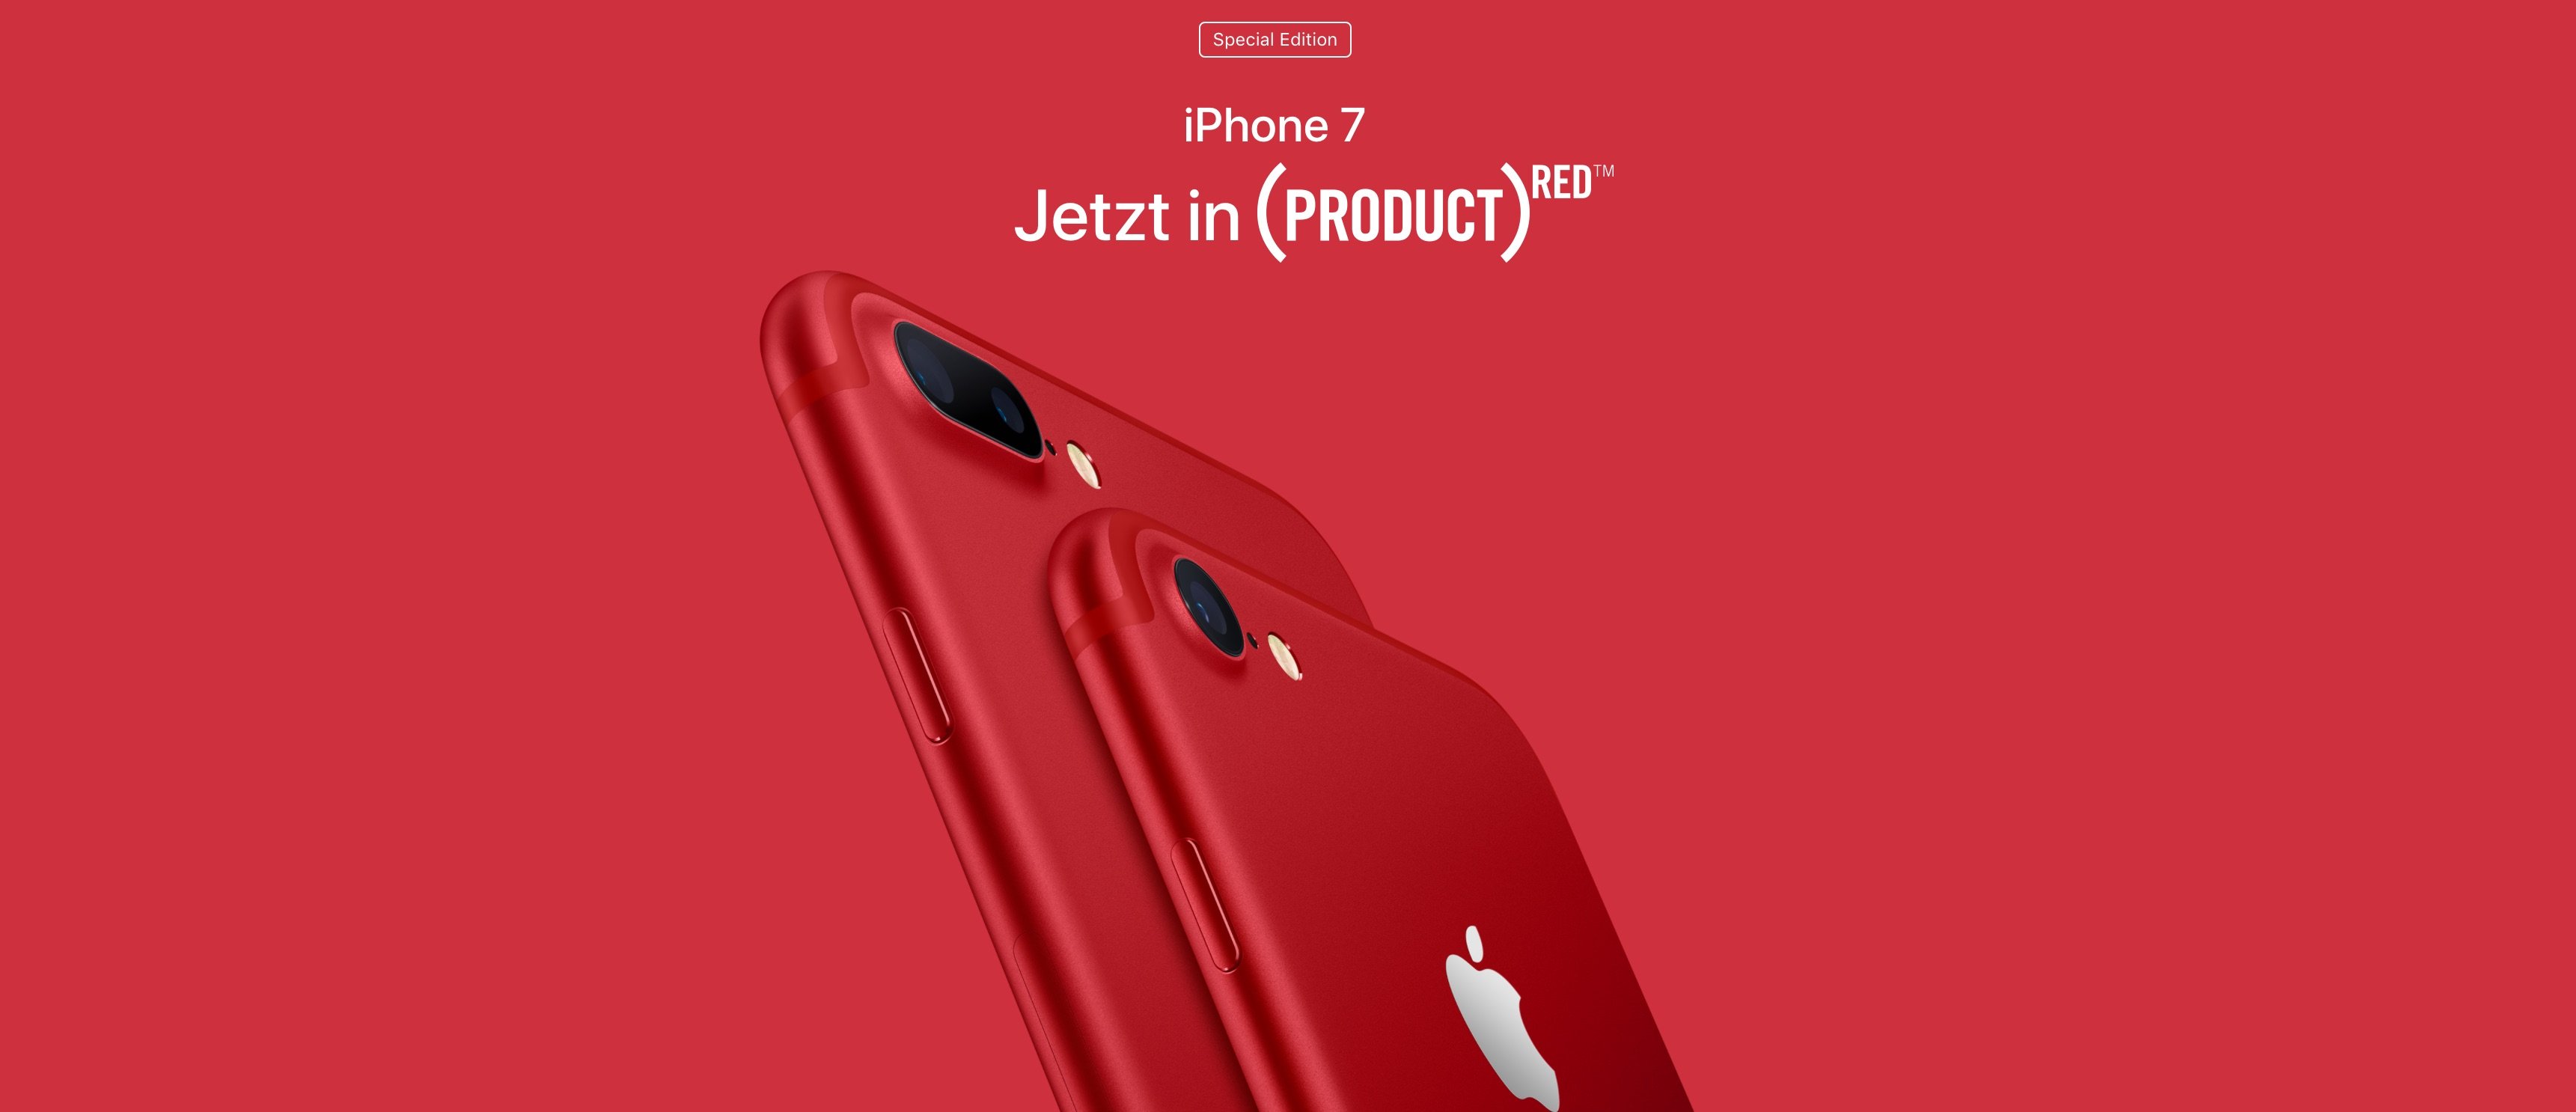 Apple iPhone 7 RED Edition: Spenden auch in China 5